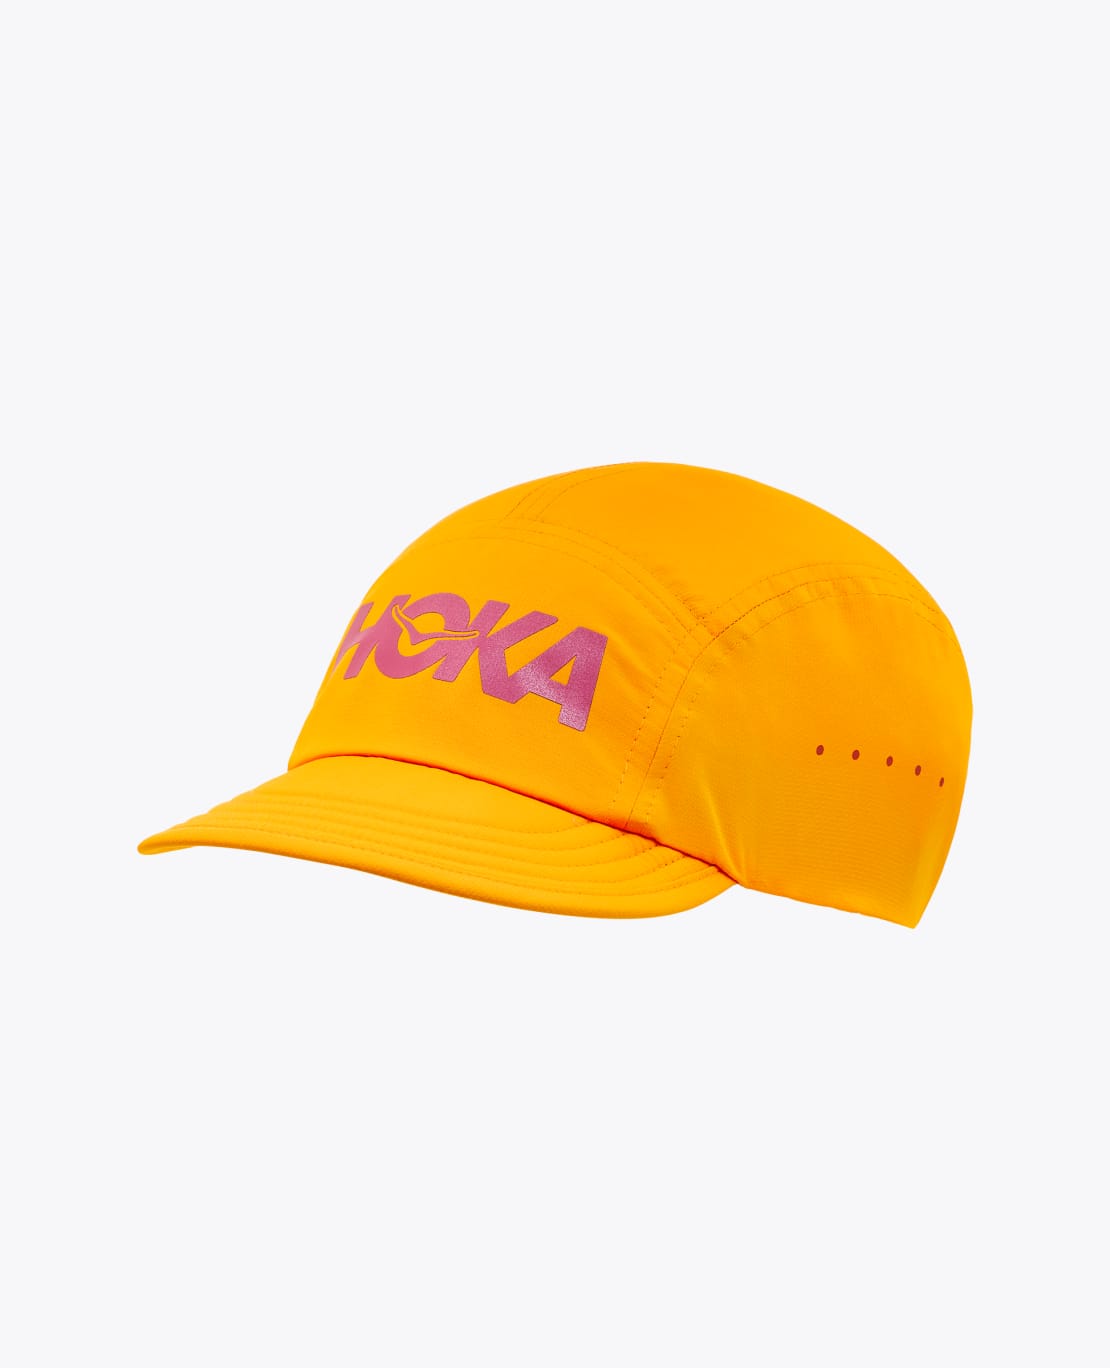 Hoka Packable Trail Hat Hiking Shoes in Solar Flare